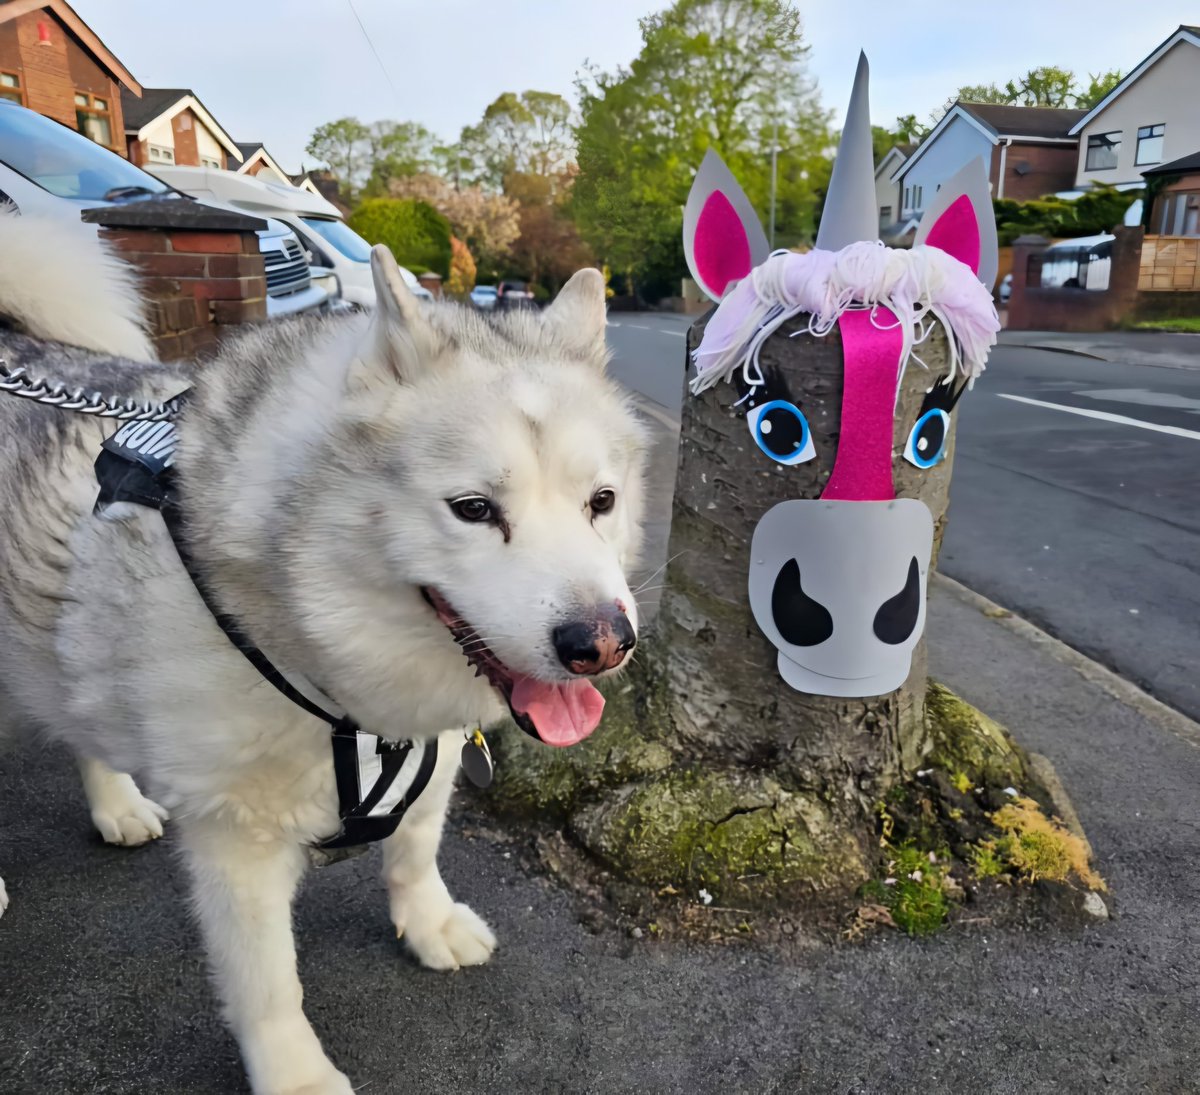 It seems that the local dog walkers appreciate the stump 😍🐕🦄😍 #dogsoftwitter #dogs #malamute